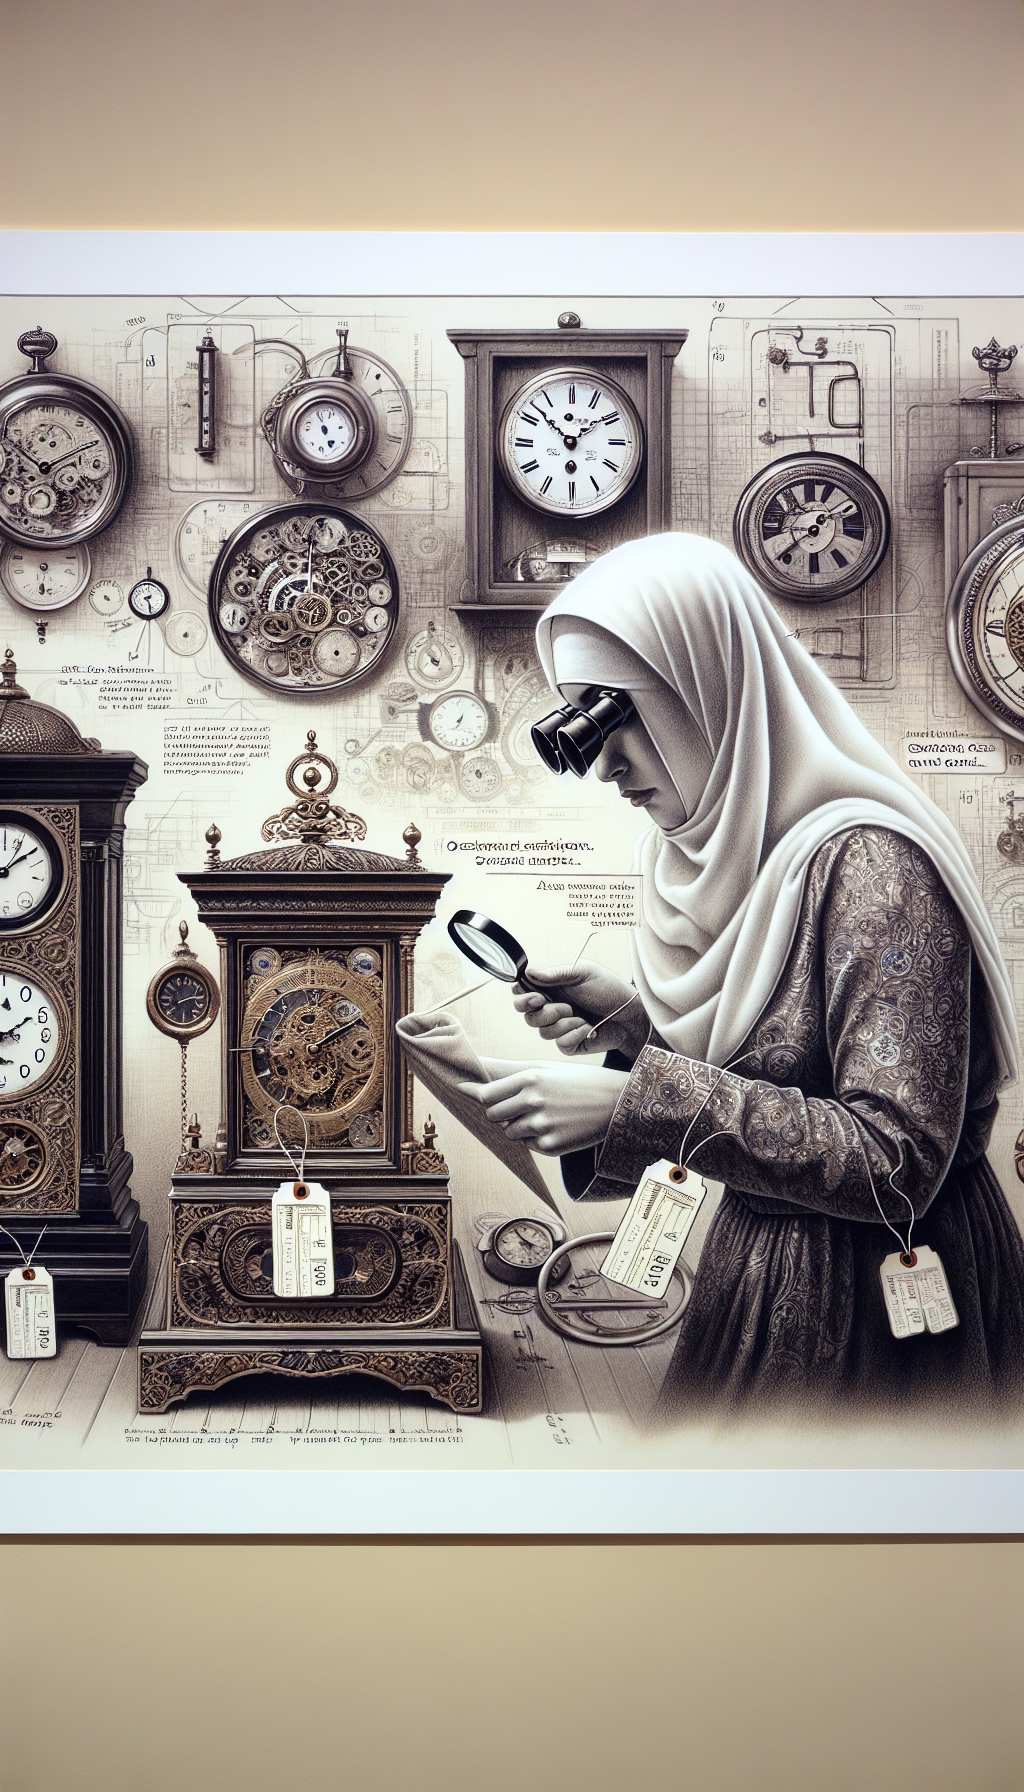 An elegantly detailed drawing depicts a person with magnifying glasses inspecting a row of vintage mantel clocks, each tagged with a price guide listing. Around them, smaller illustrations show snippets of advice, like a soft cloth dusting a clock and a safe with optimal storing conditions, against a backdrop of faded clock schematics, suggesting both care and investment value.